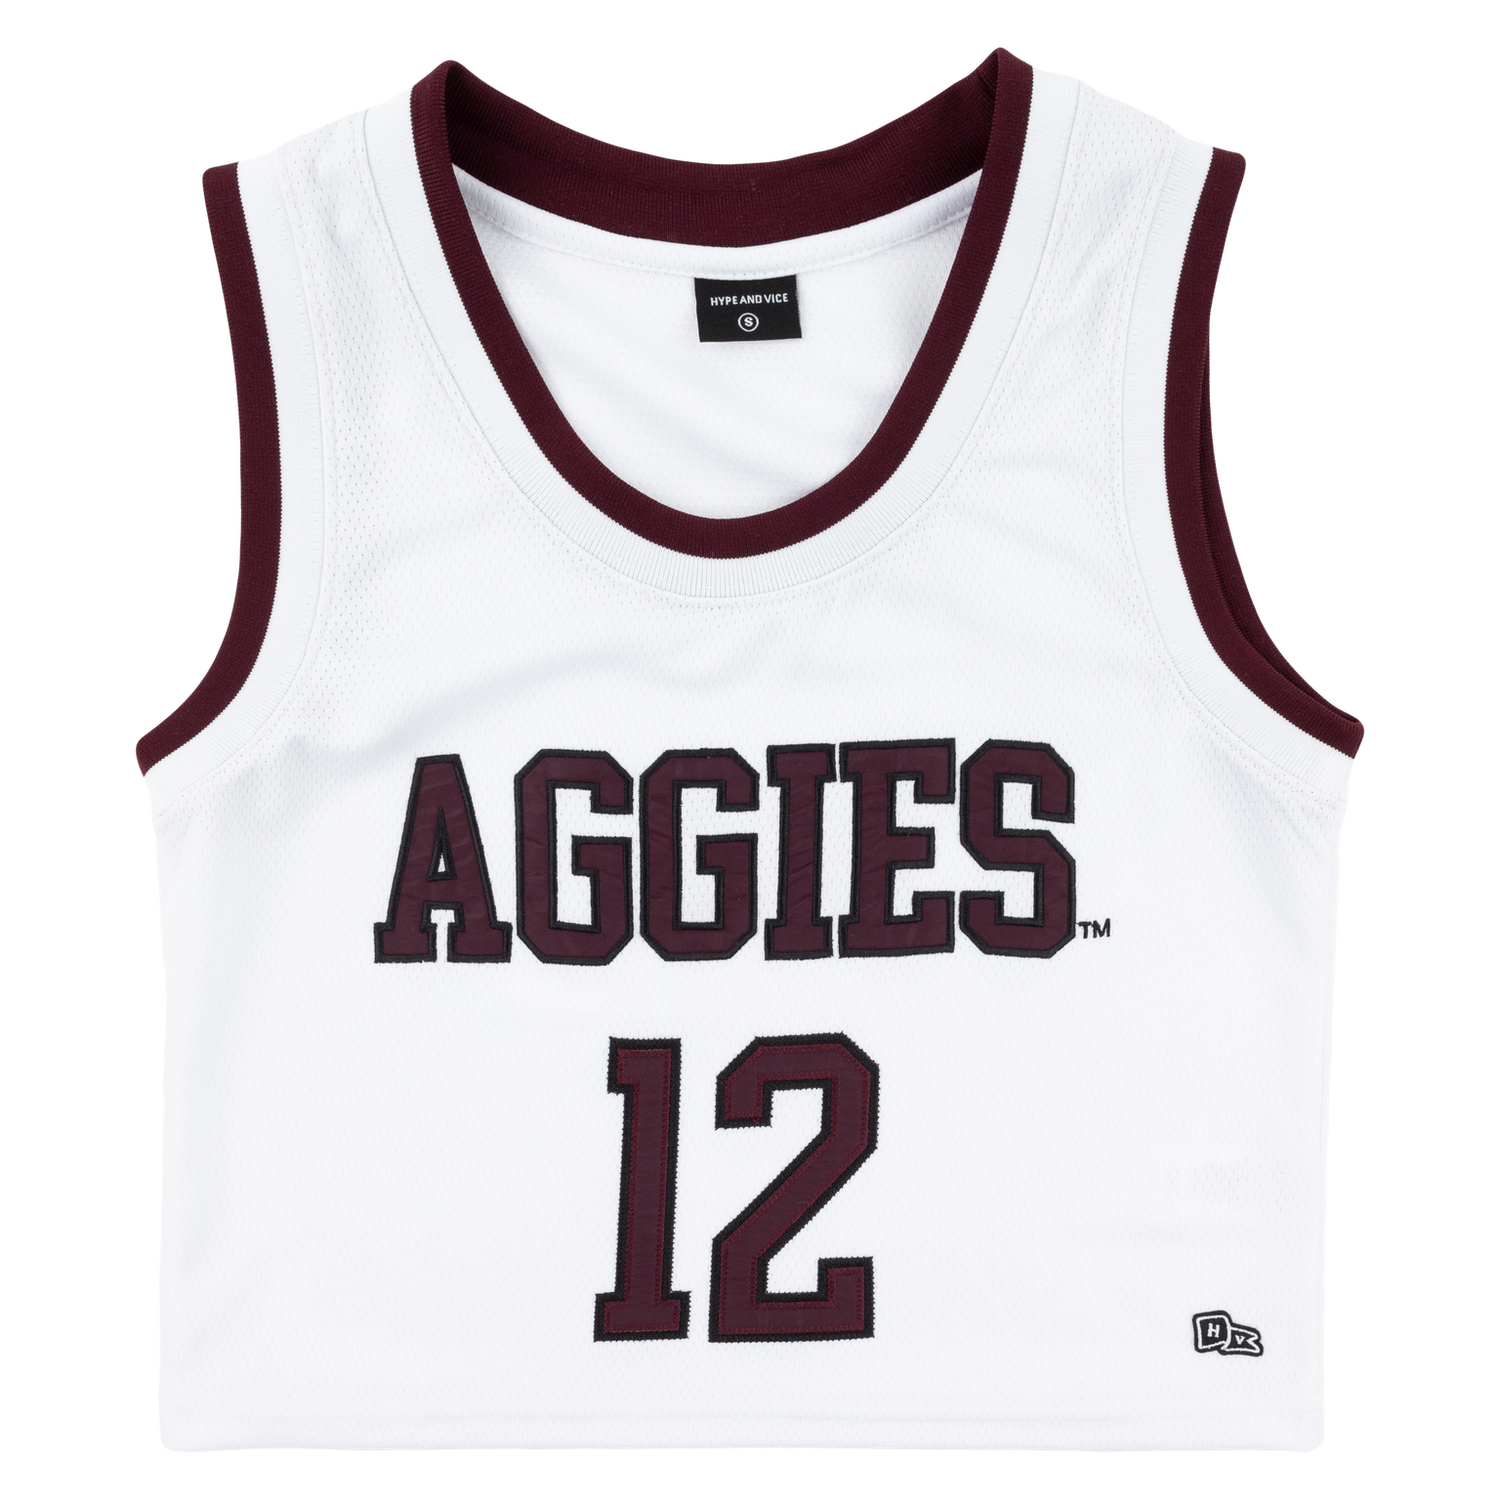 Texas A&M Aggies Cropped Basketball Jersey